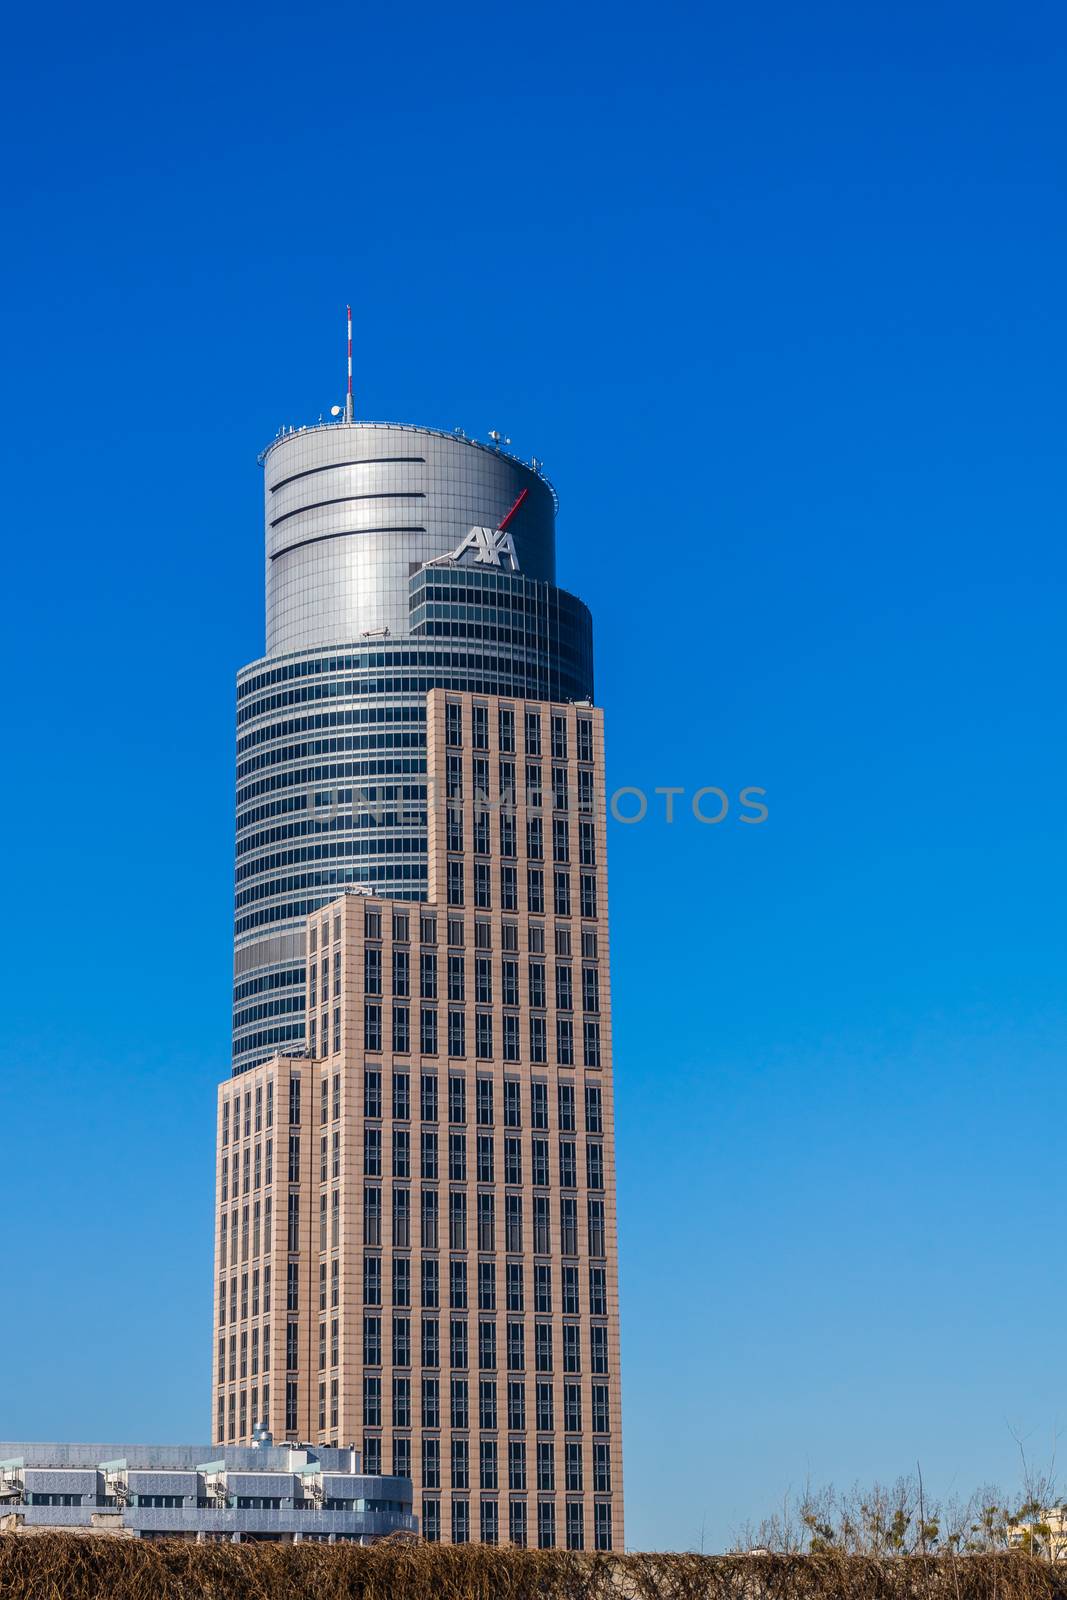 Warsaw Trade Tower built by Daewoo concern in 1999 at 208 m high with 43 floors above the ground. One of the three buildings in town with a height exceeding 200 meters.